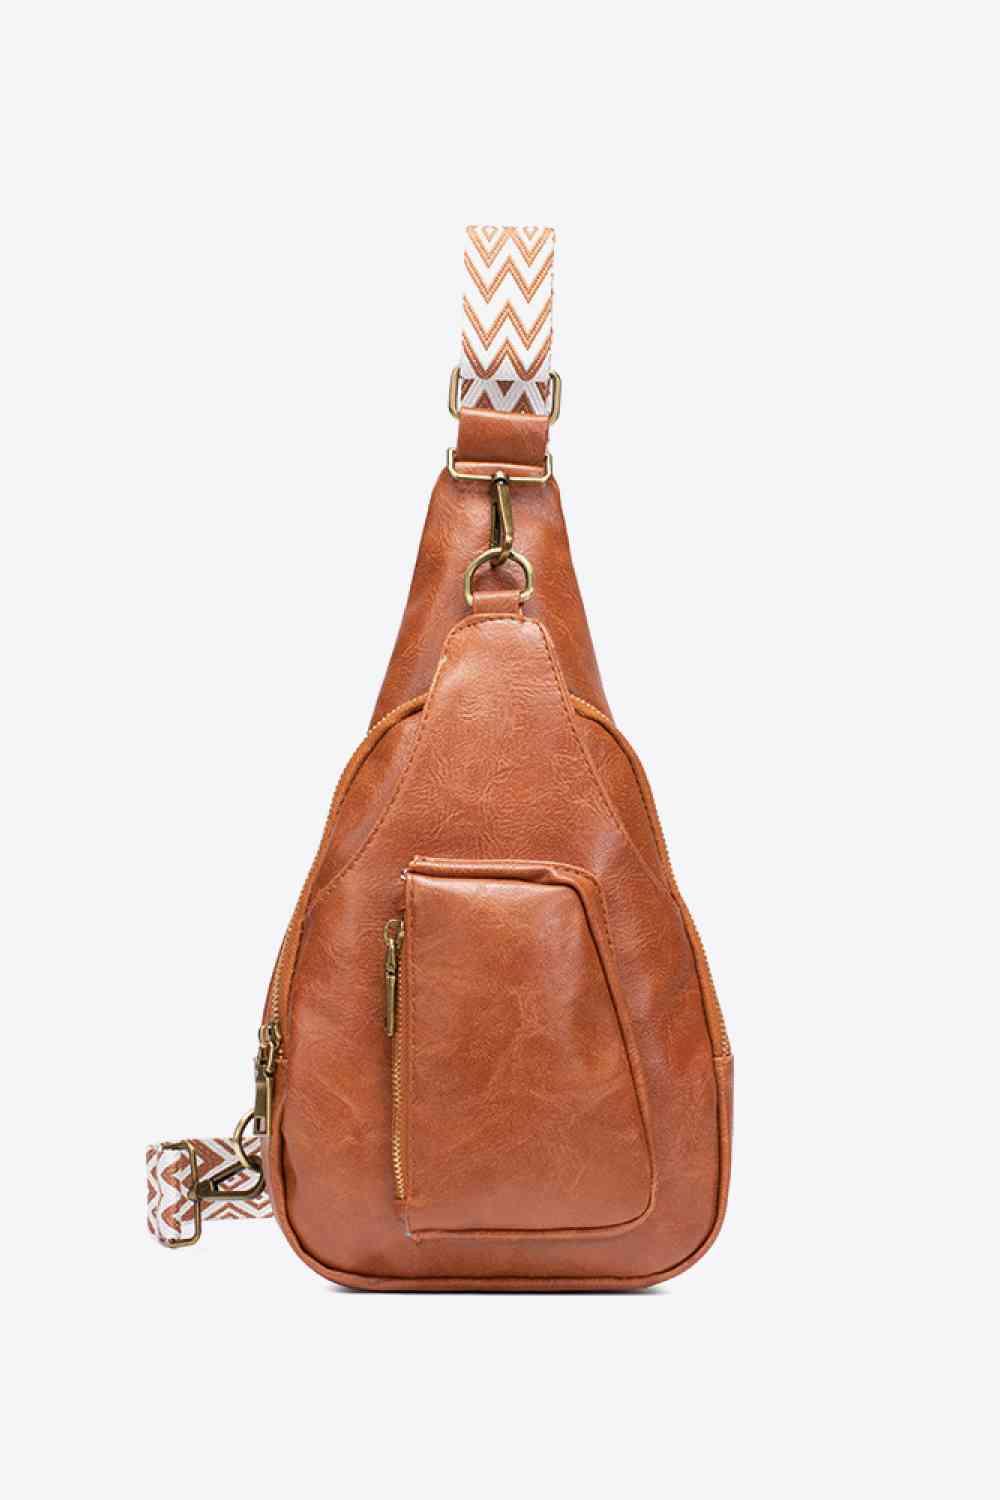 All The Feels PU Leather Sling Bag - Twin Chronicles 